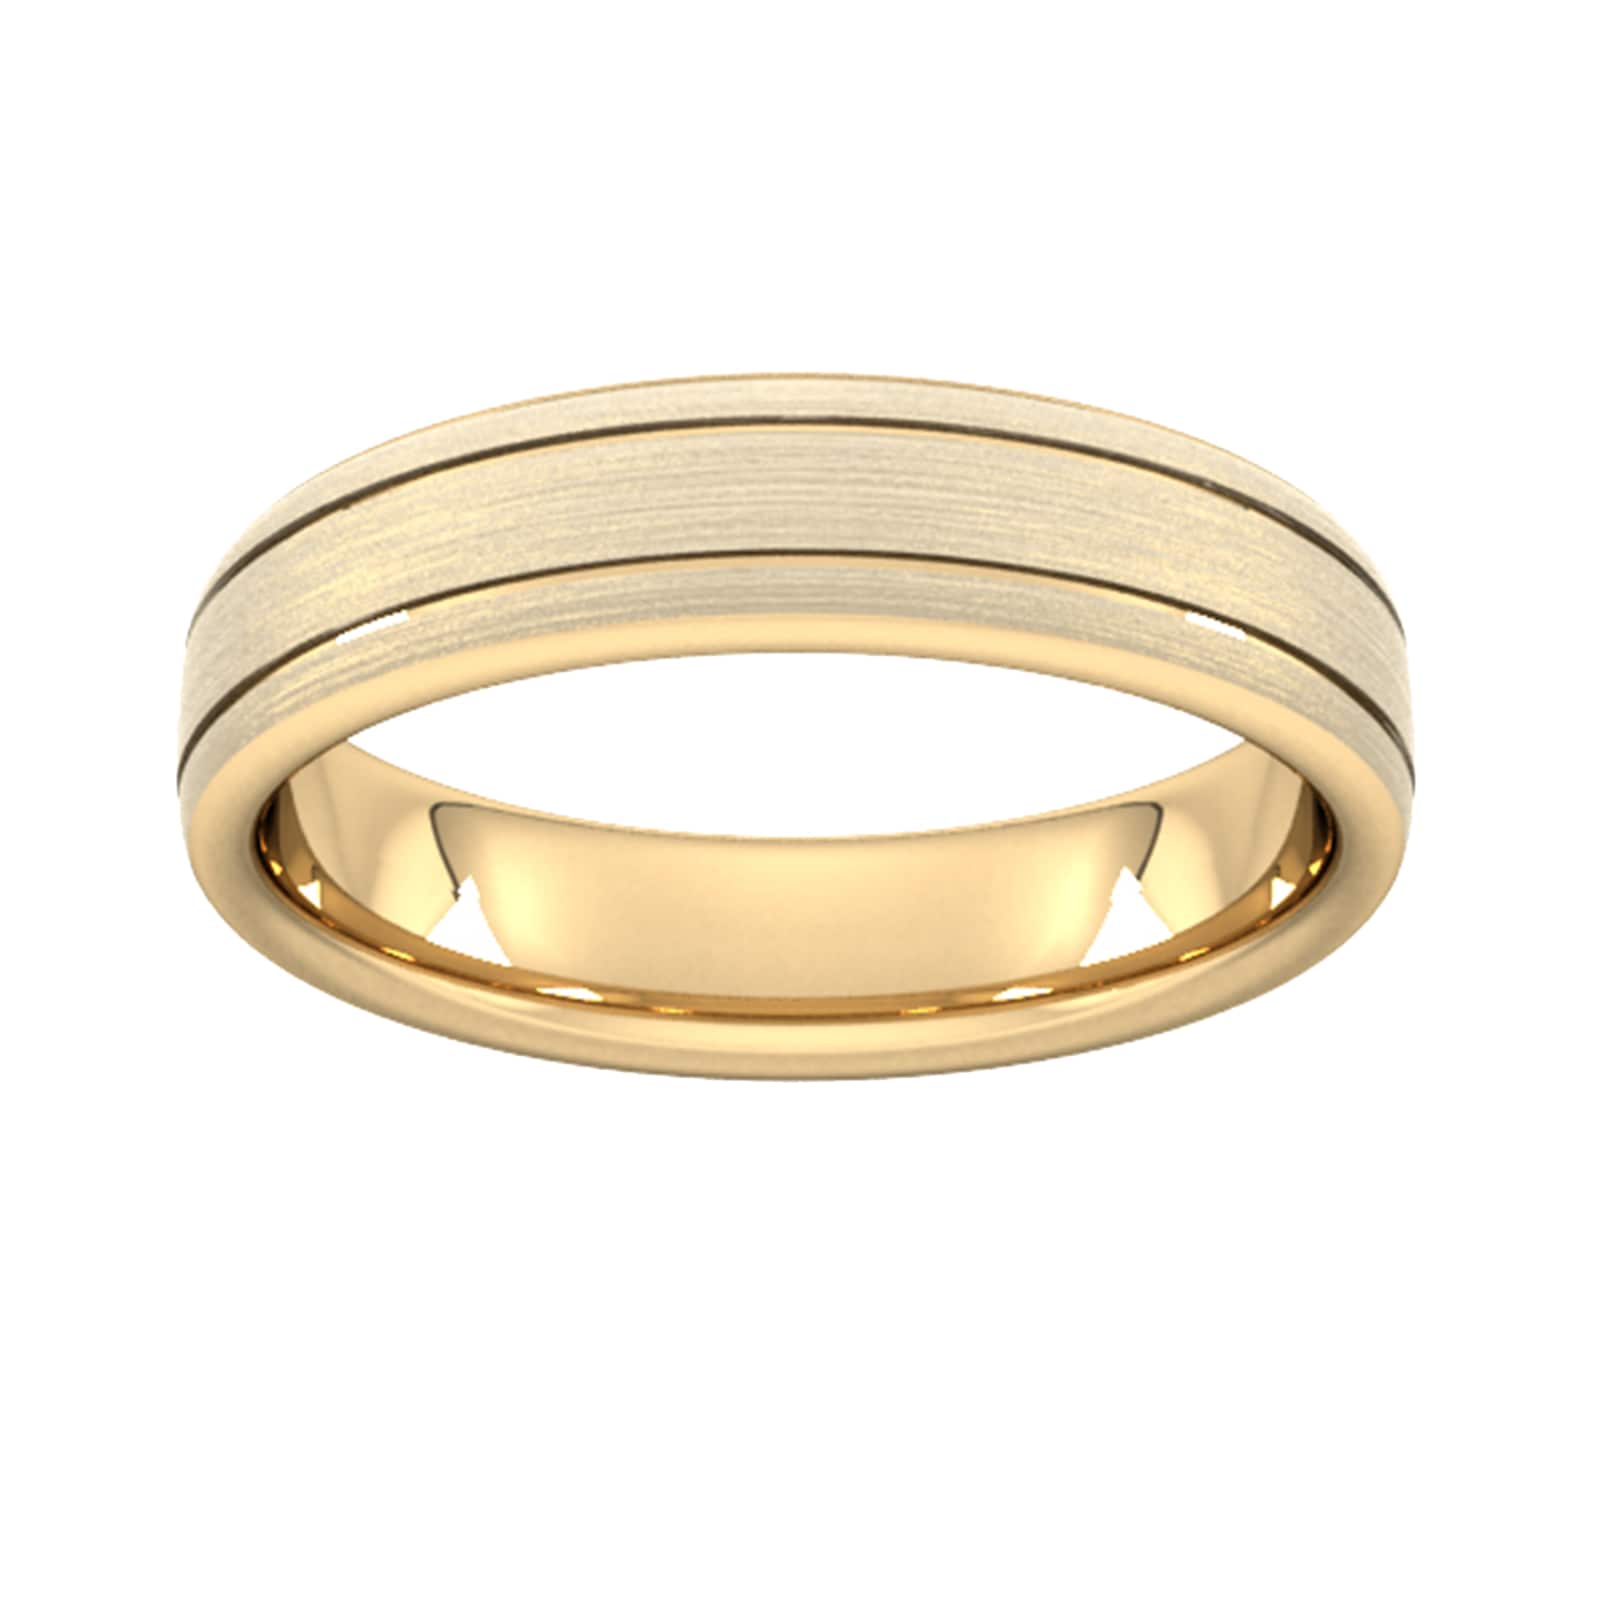 5mm D Shape Standard Matt Finish With Double Grooves Wedding Ring In 18 Carat Yellow Gold - Ring Size J